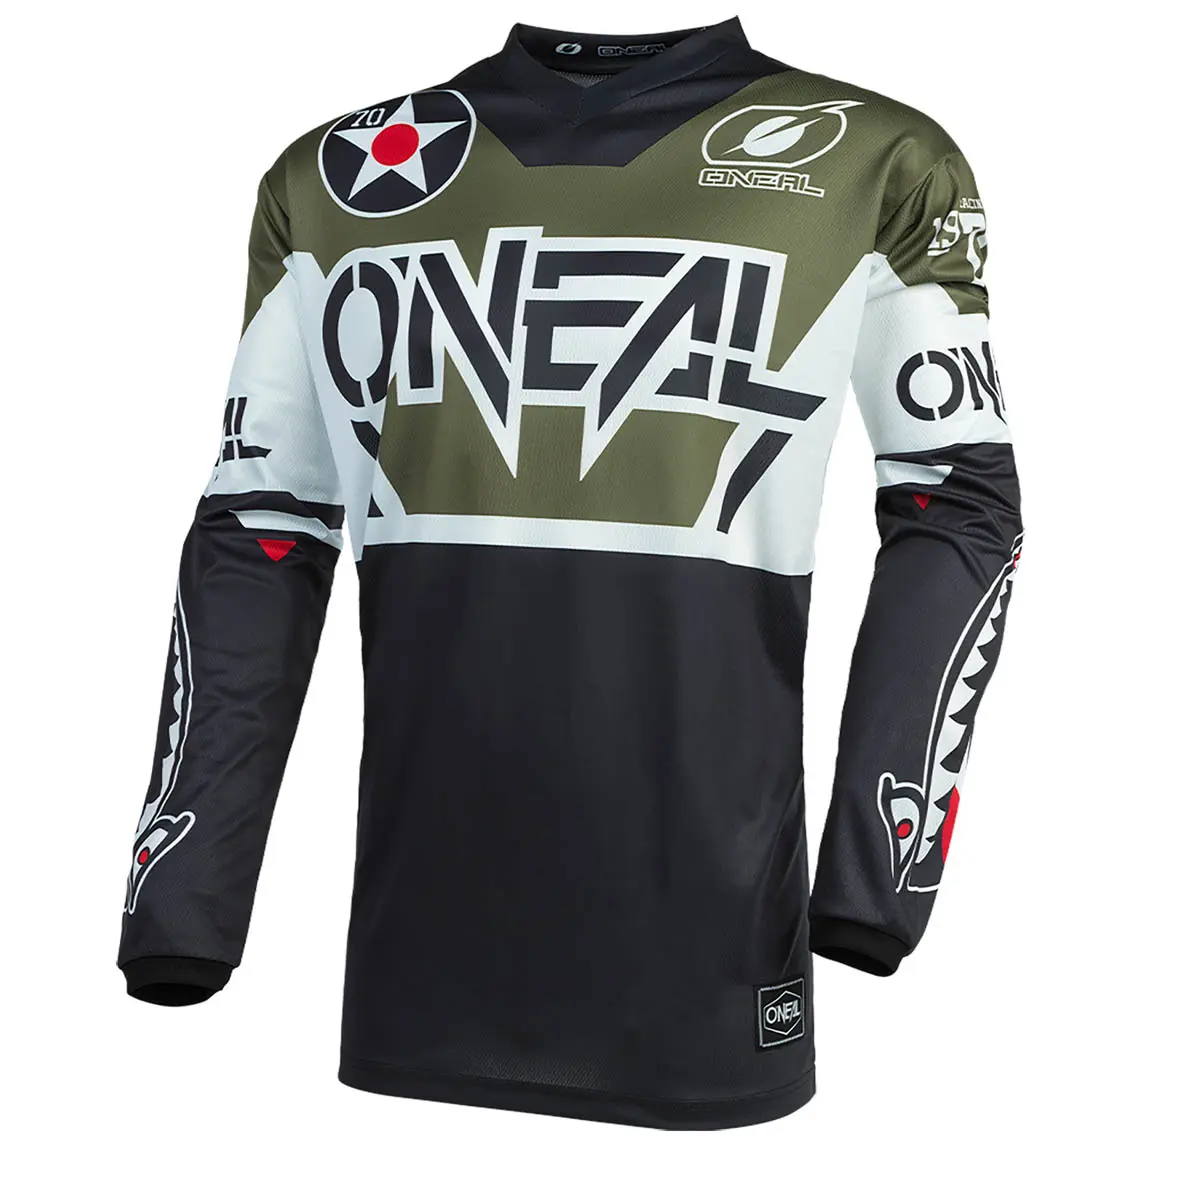 2021_ONeal_ELEMENT_Jersey_WARHAWK_black_white_green_front